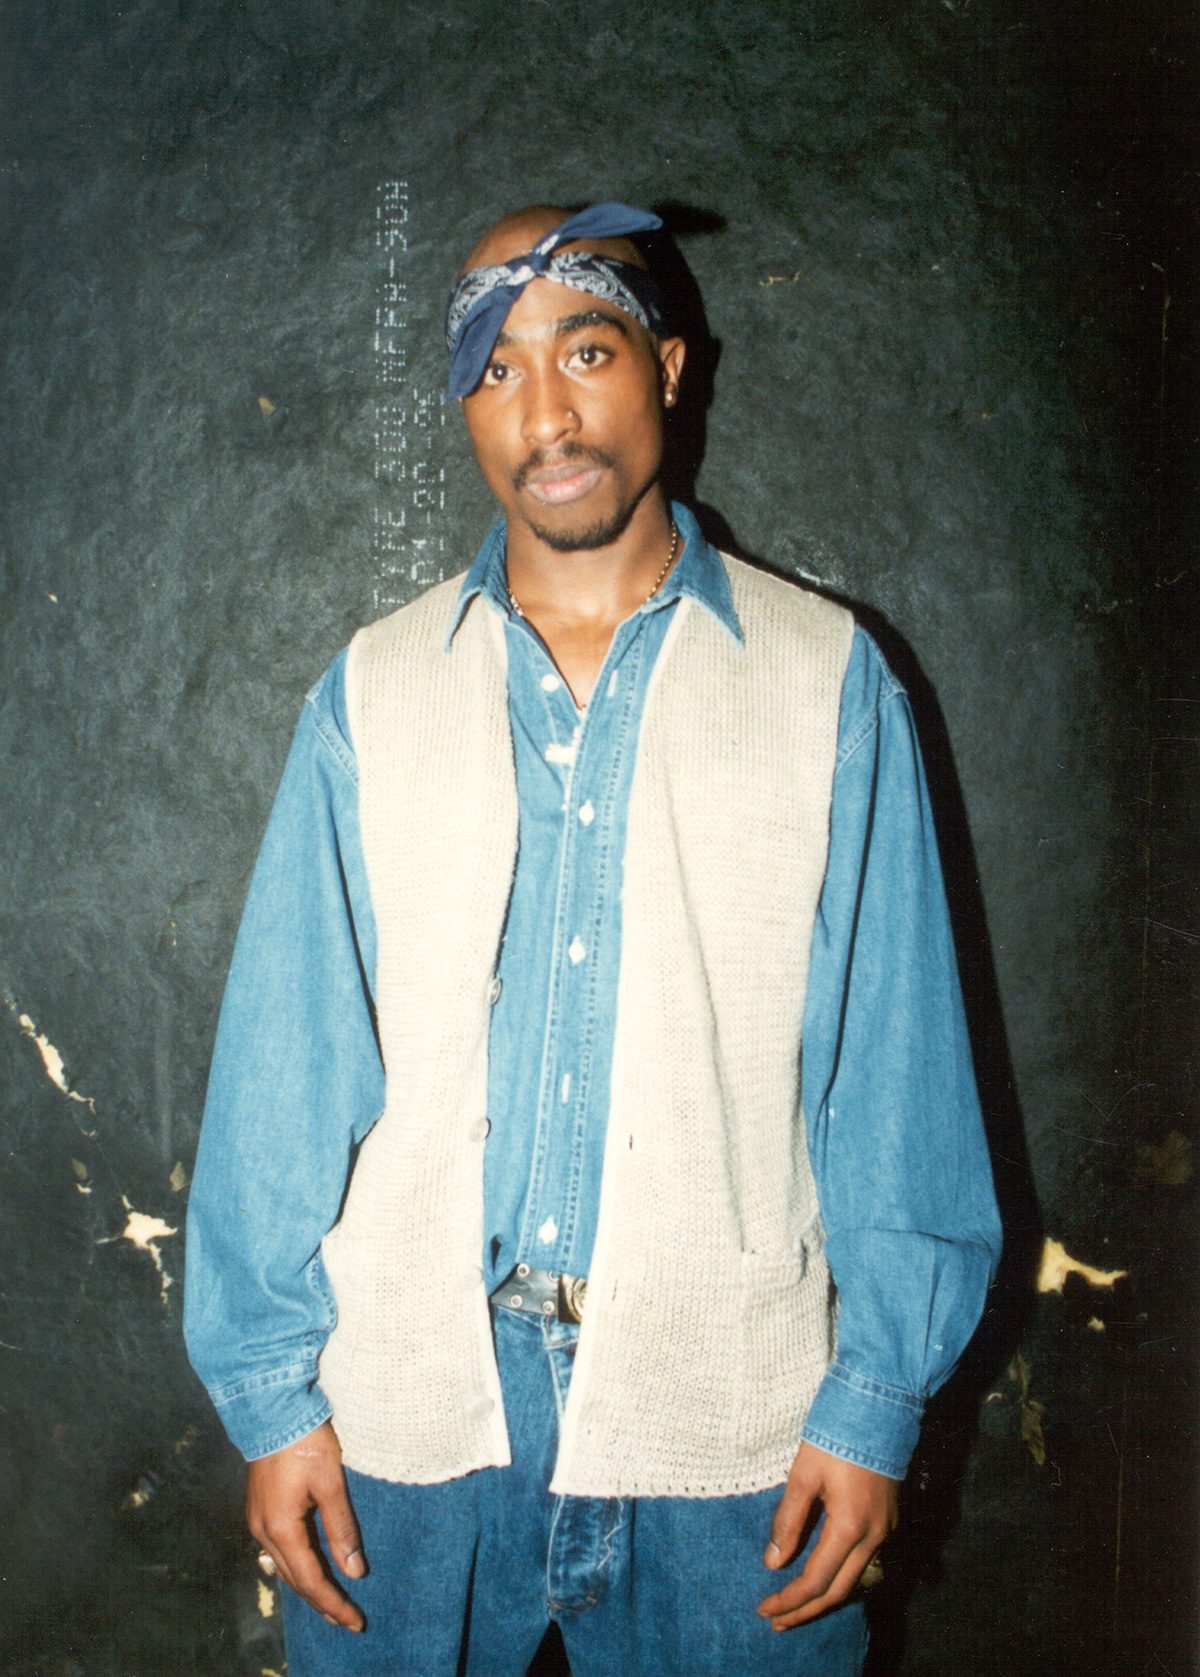 Two Reasons to Celebrate the Induction of Tupac Shakur Into the Hall of Fame